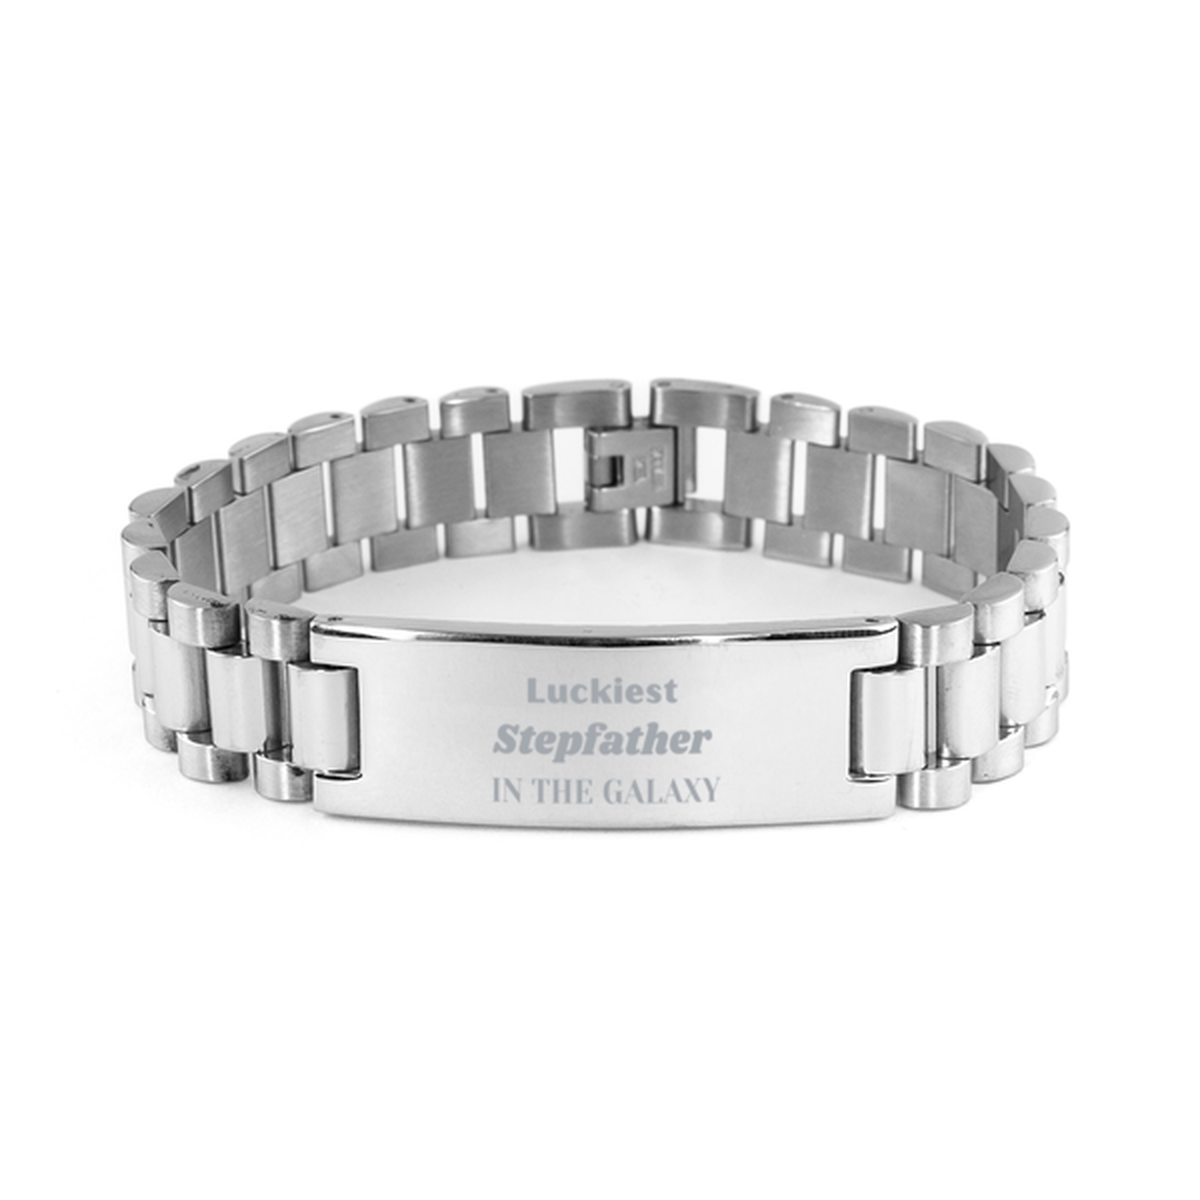 Luckiest Stepfather in the Galaxy, To My Stepfather Engraved Gifts, Christmas Stepfather Ladder Stainless Steel Bracelet Gifts, X-mas Birthday Unique Gifts For Stepfather Men Women